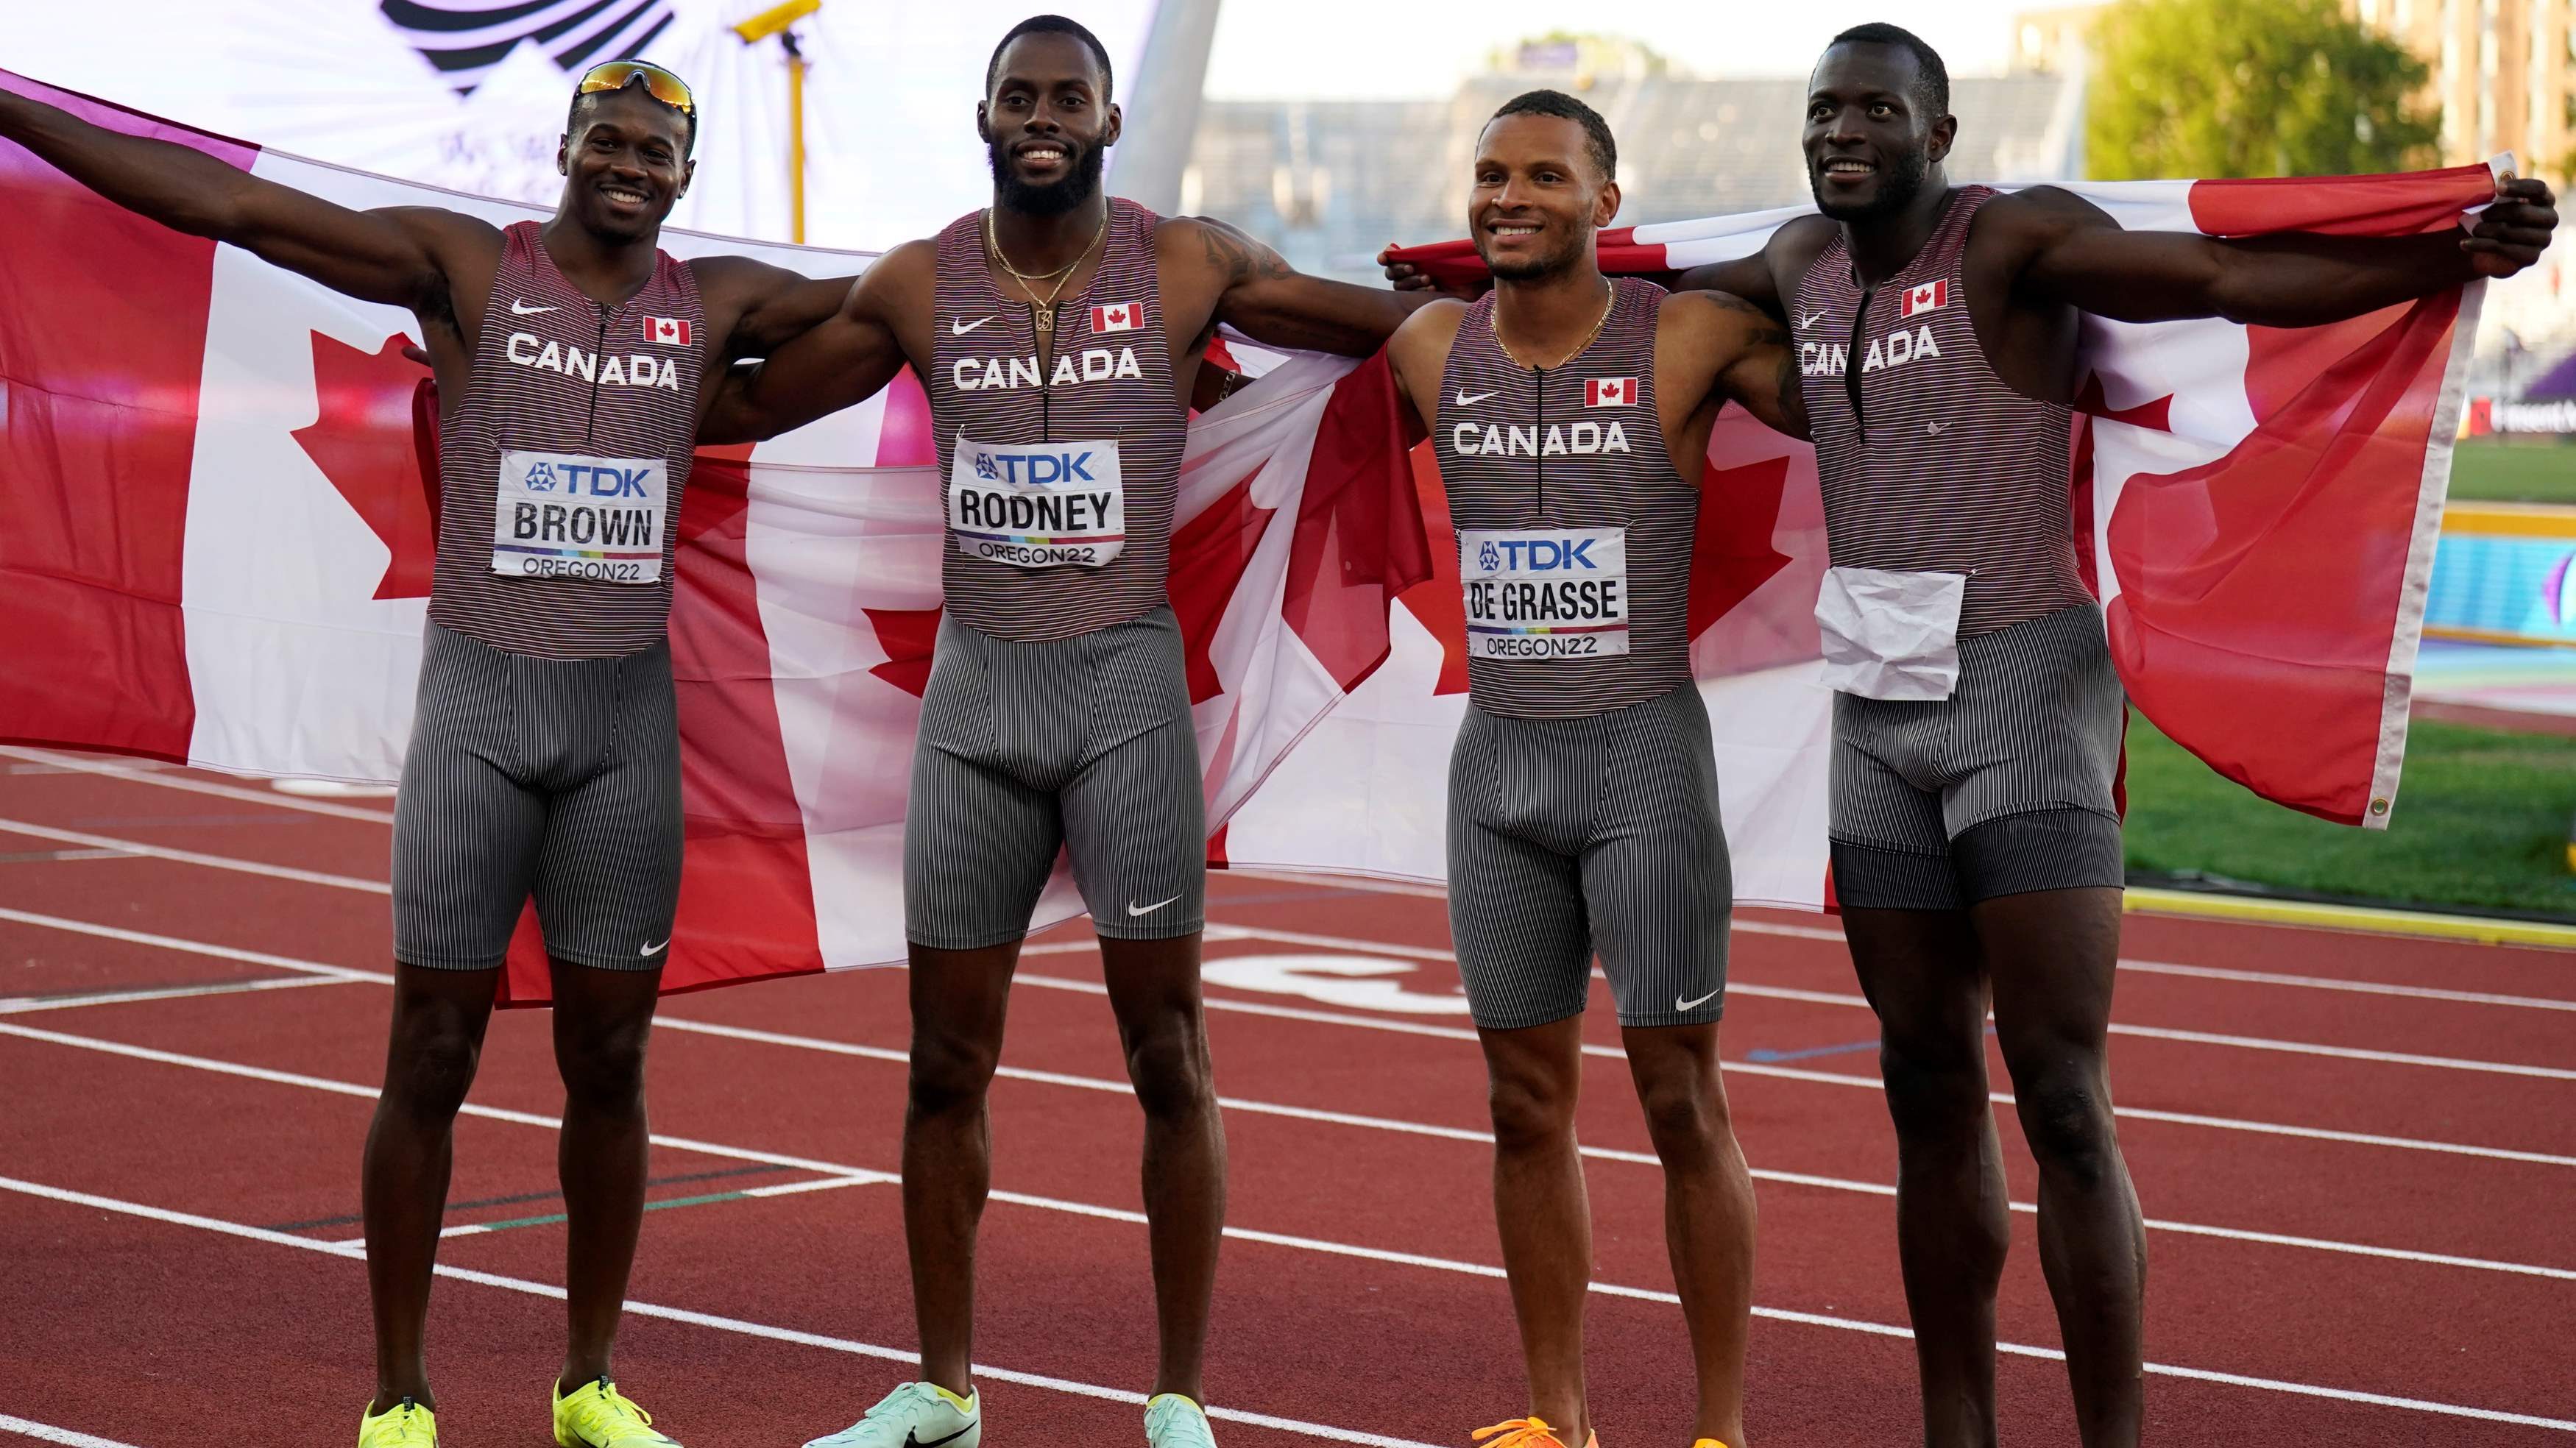 A few Canadians to watch at the World Athletics Championships